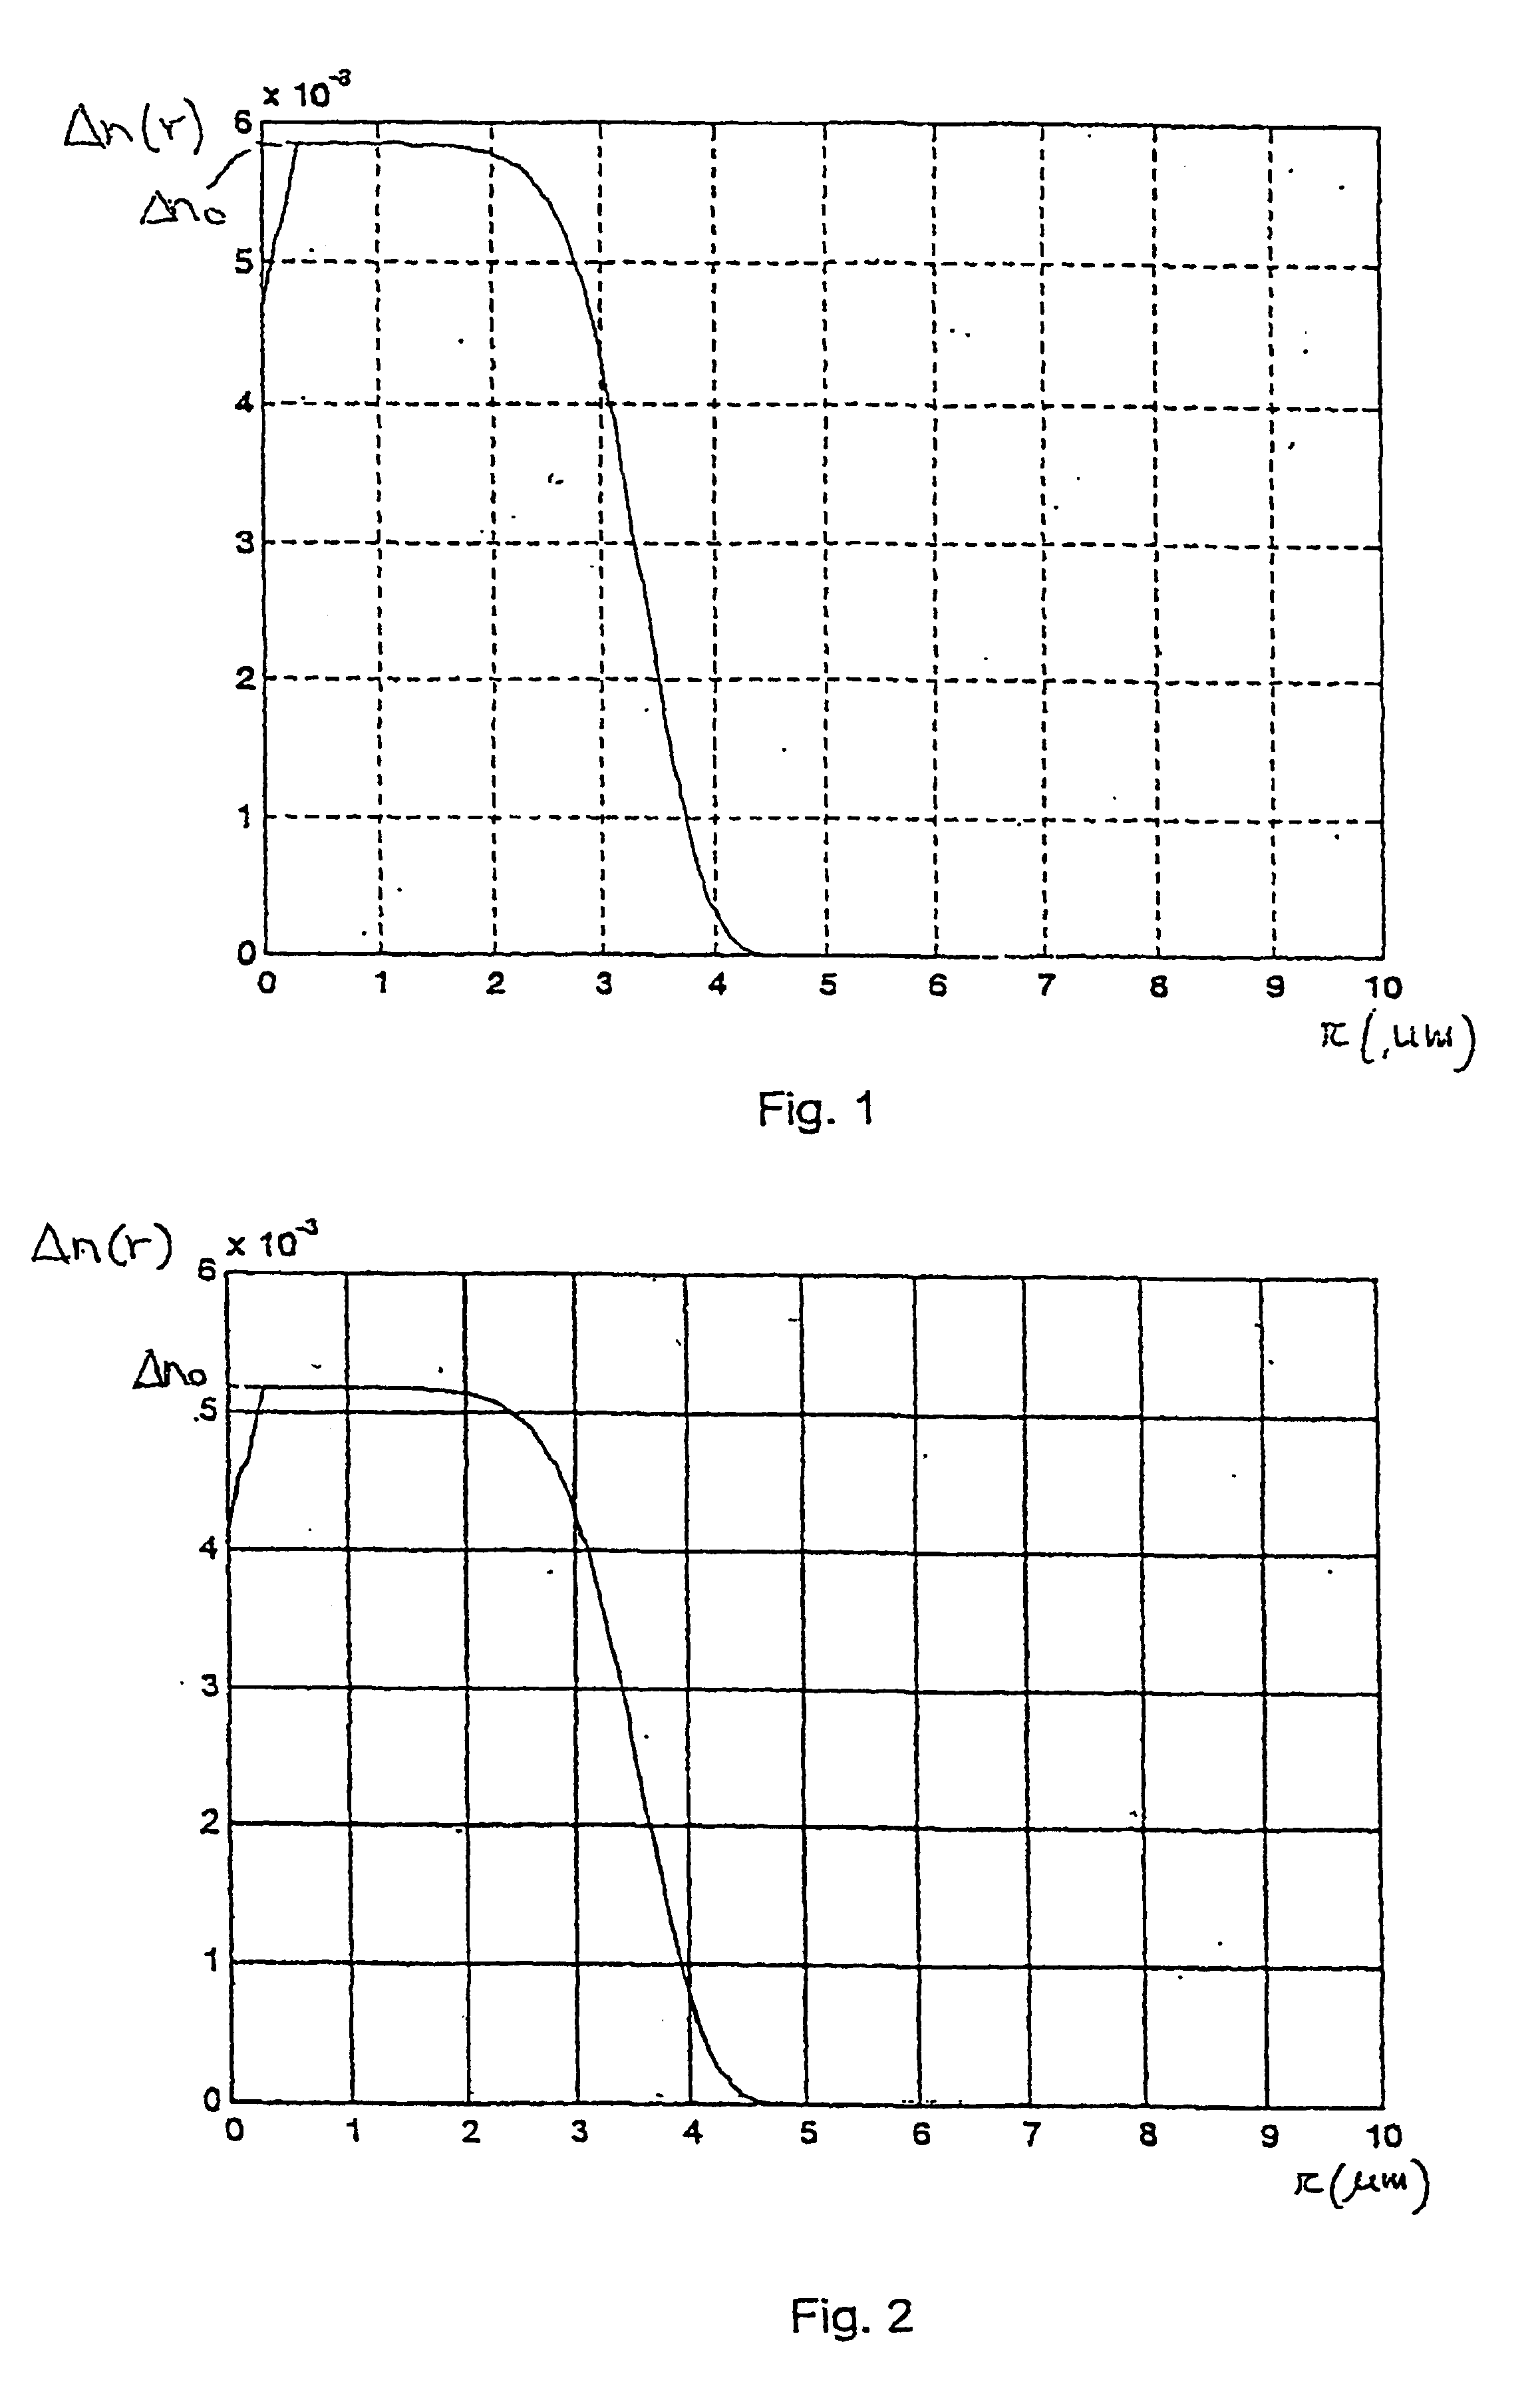 Network for distributing signals to a plurality of user equipment